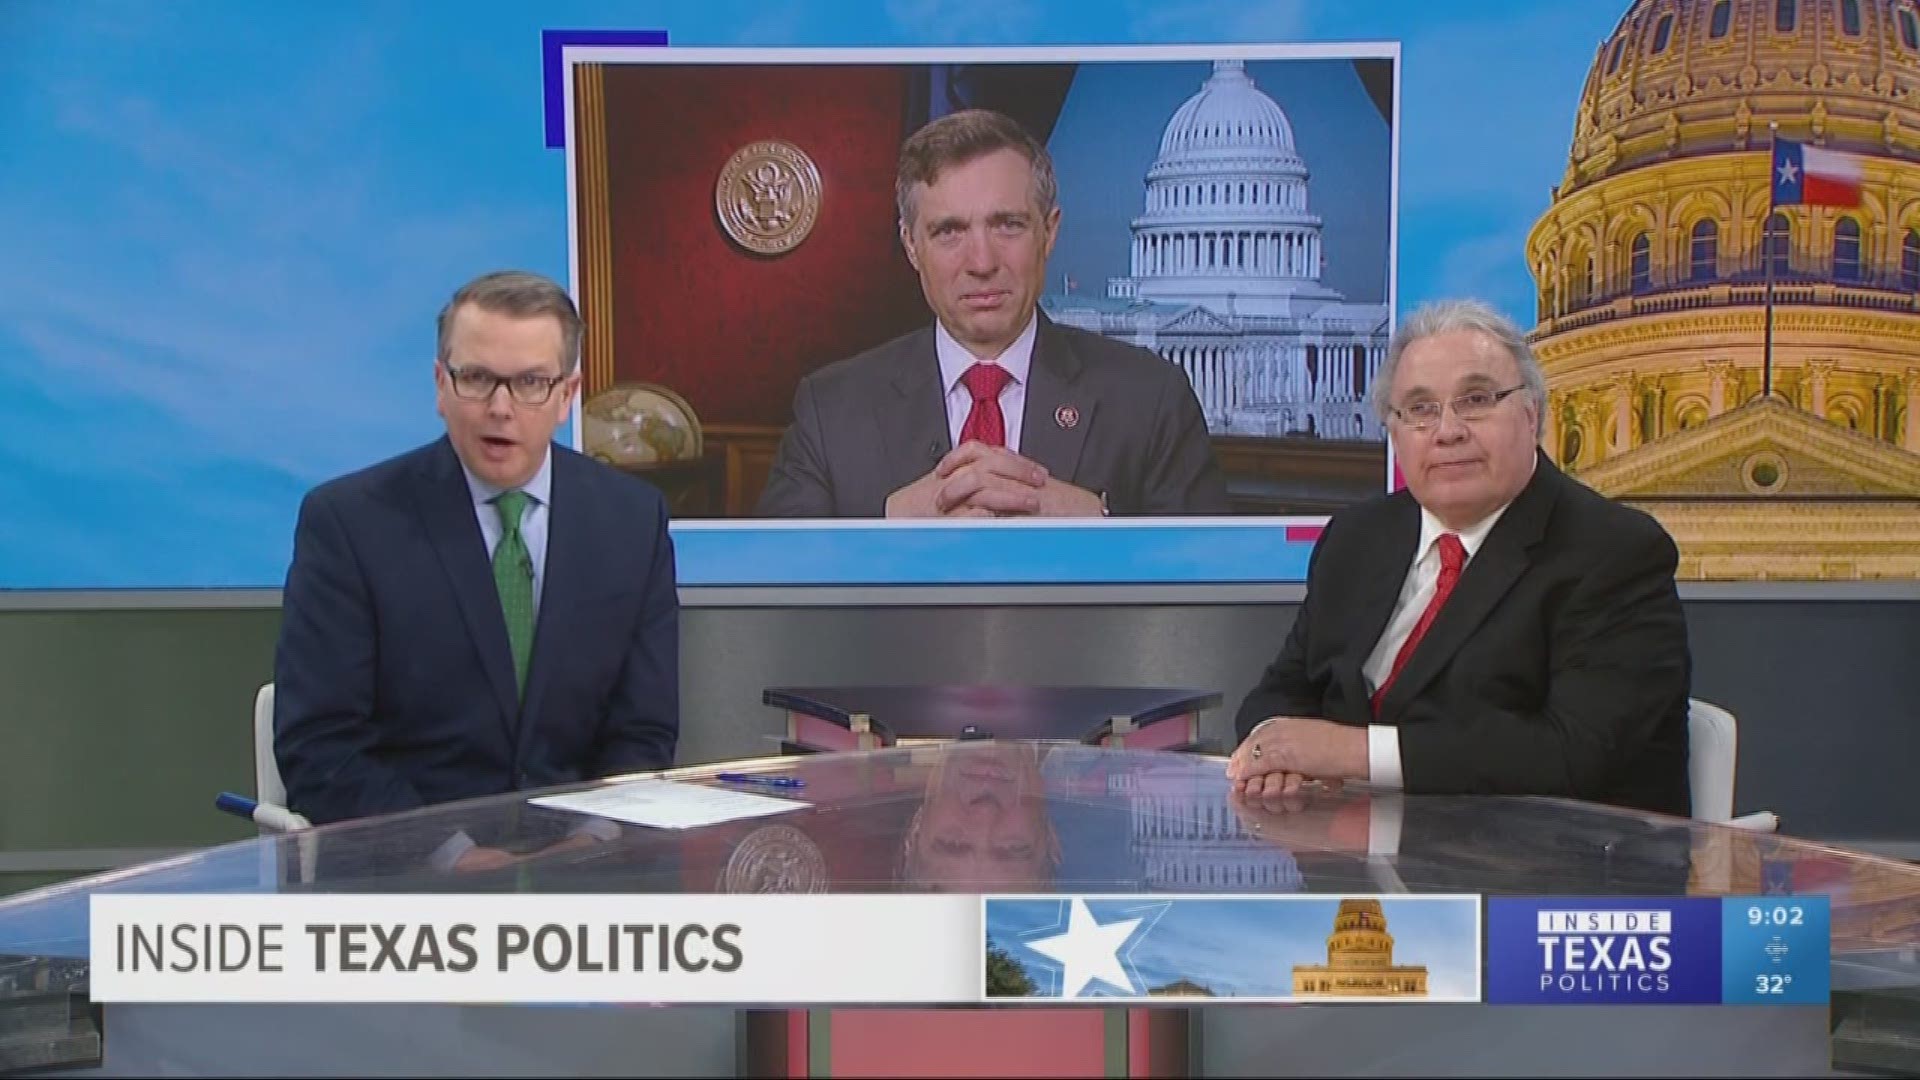 U.S. Rep. Van Taylor (R-Plano) joined host Jason Whitely and Bud Kennedy of the Fort Worth Star-Telegram to discuss the crisis with Iran and the impeachment case.